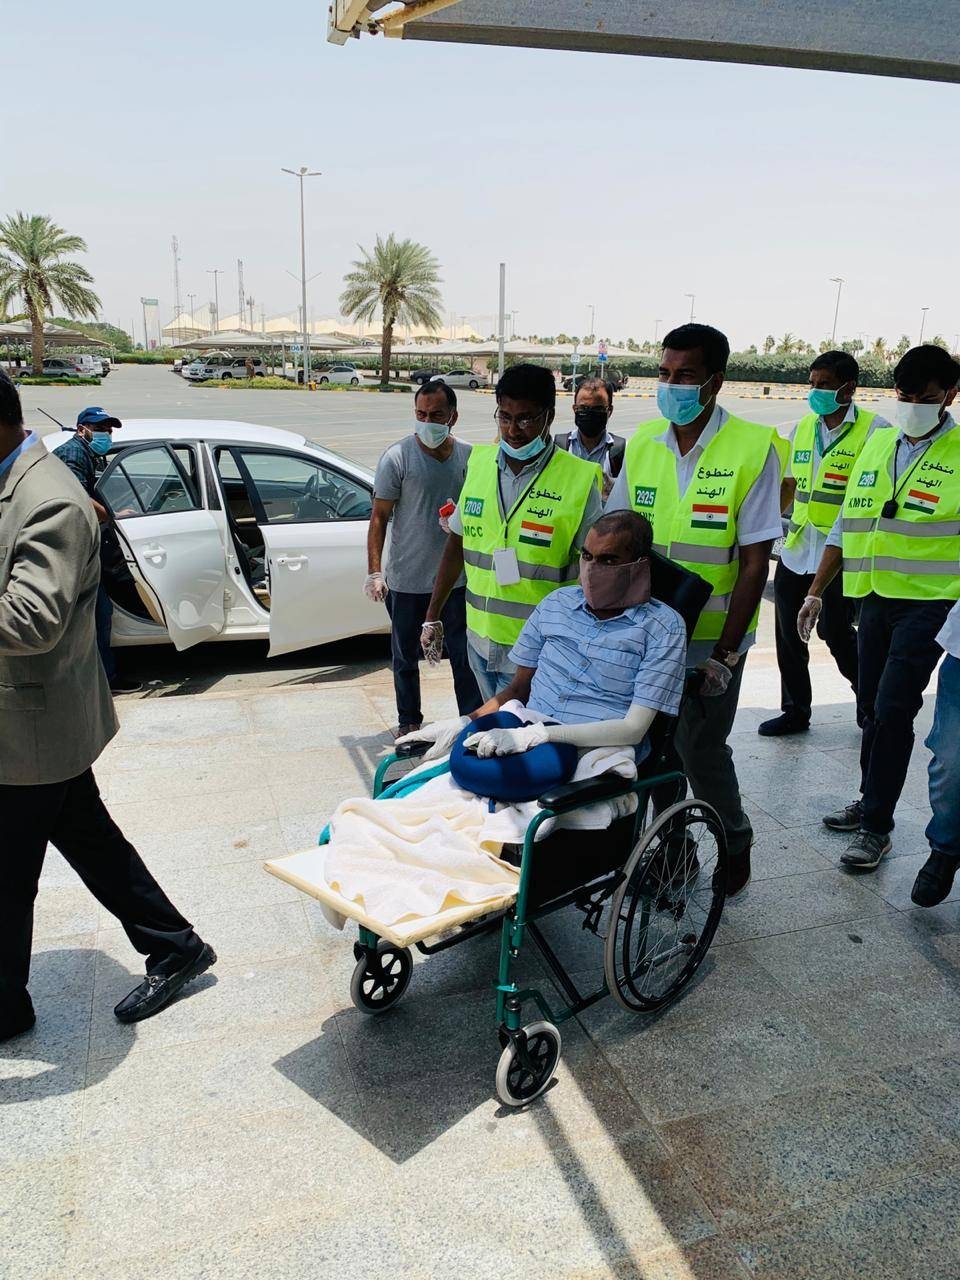 KMCC volunteers are seen distributing PPE kits to passengers bound for India at King Abdulaziz International Airport in Jeddah.